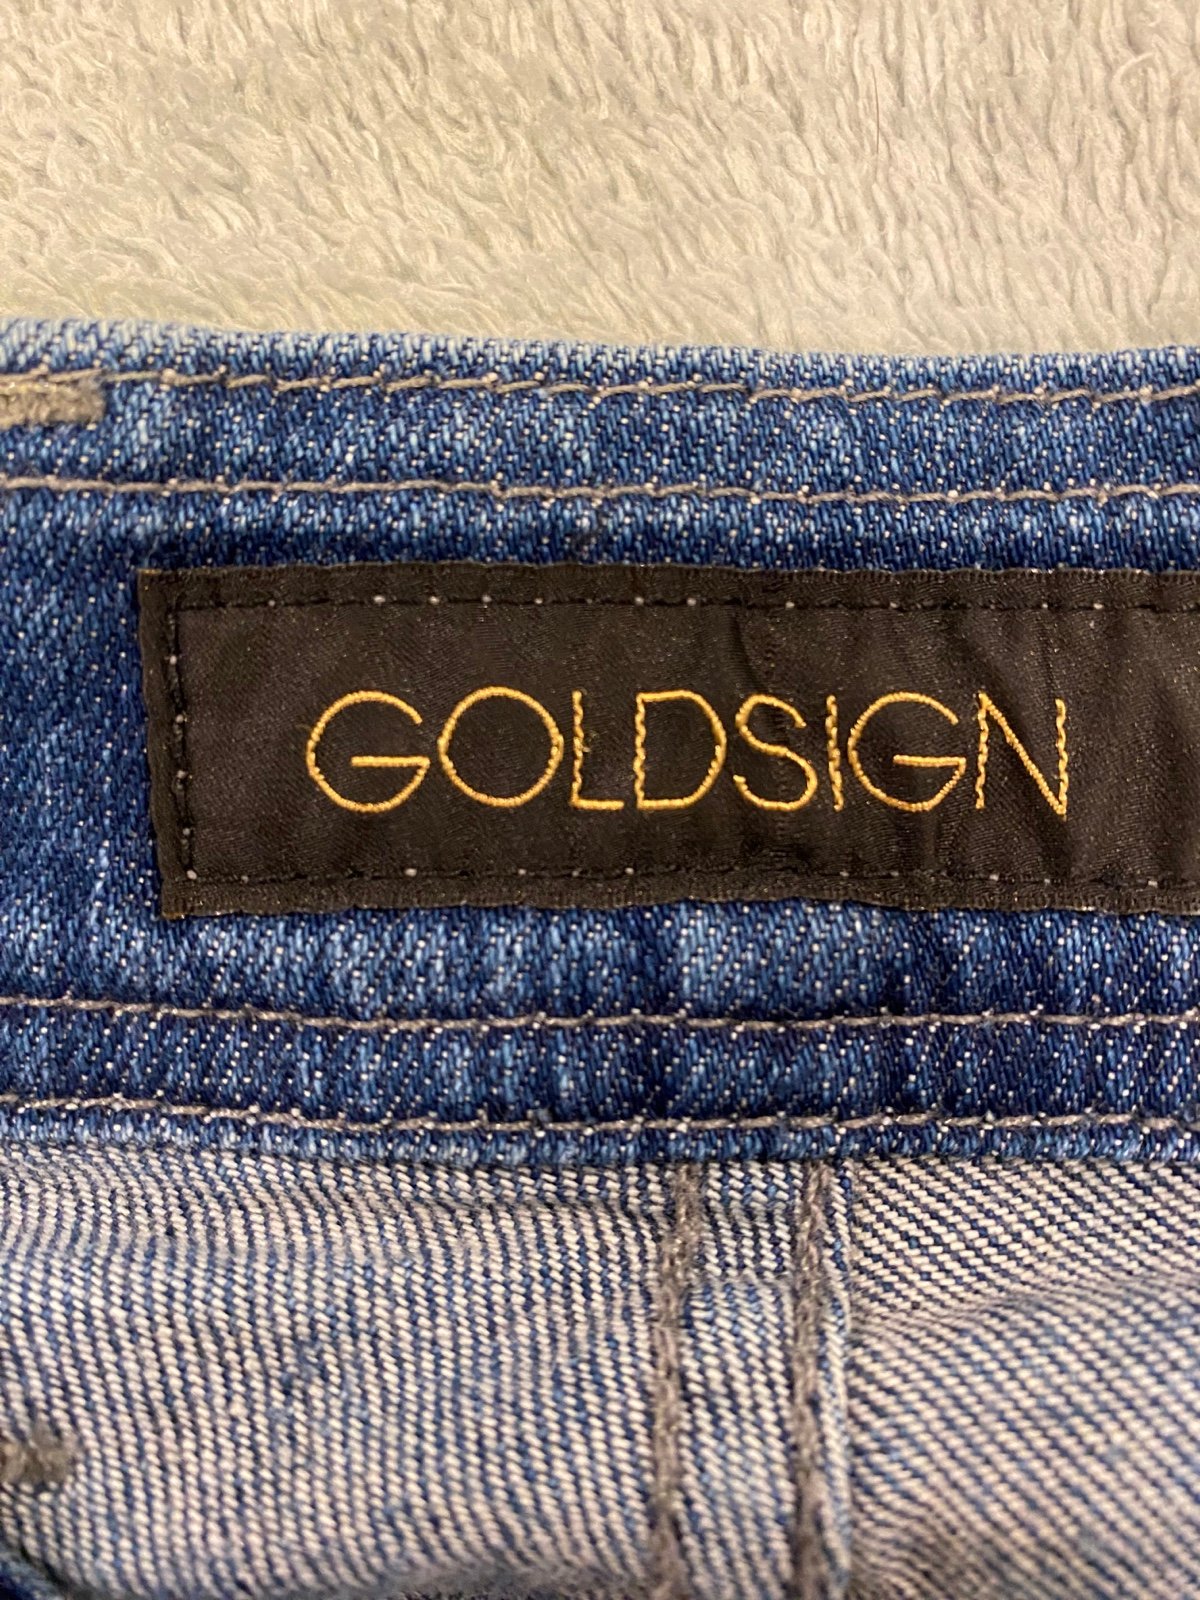 Special offer  Womens Goldsign Jeans 28 Denim Blue Flare Long Pants USA Stretch 28x35 OOuLTIkJv Everyday Low Prices